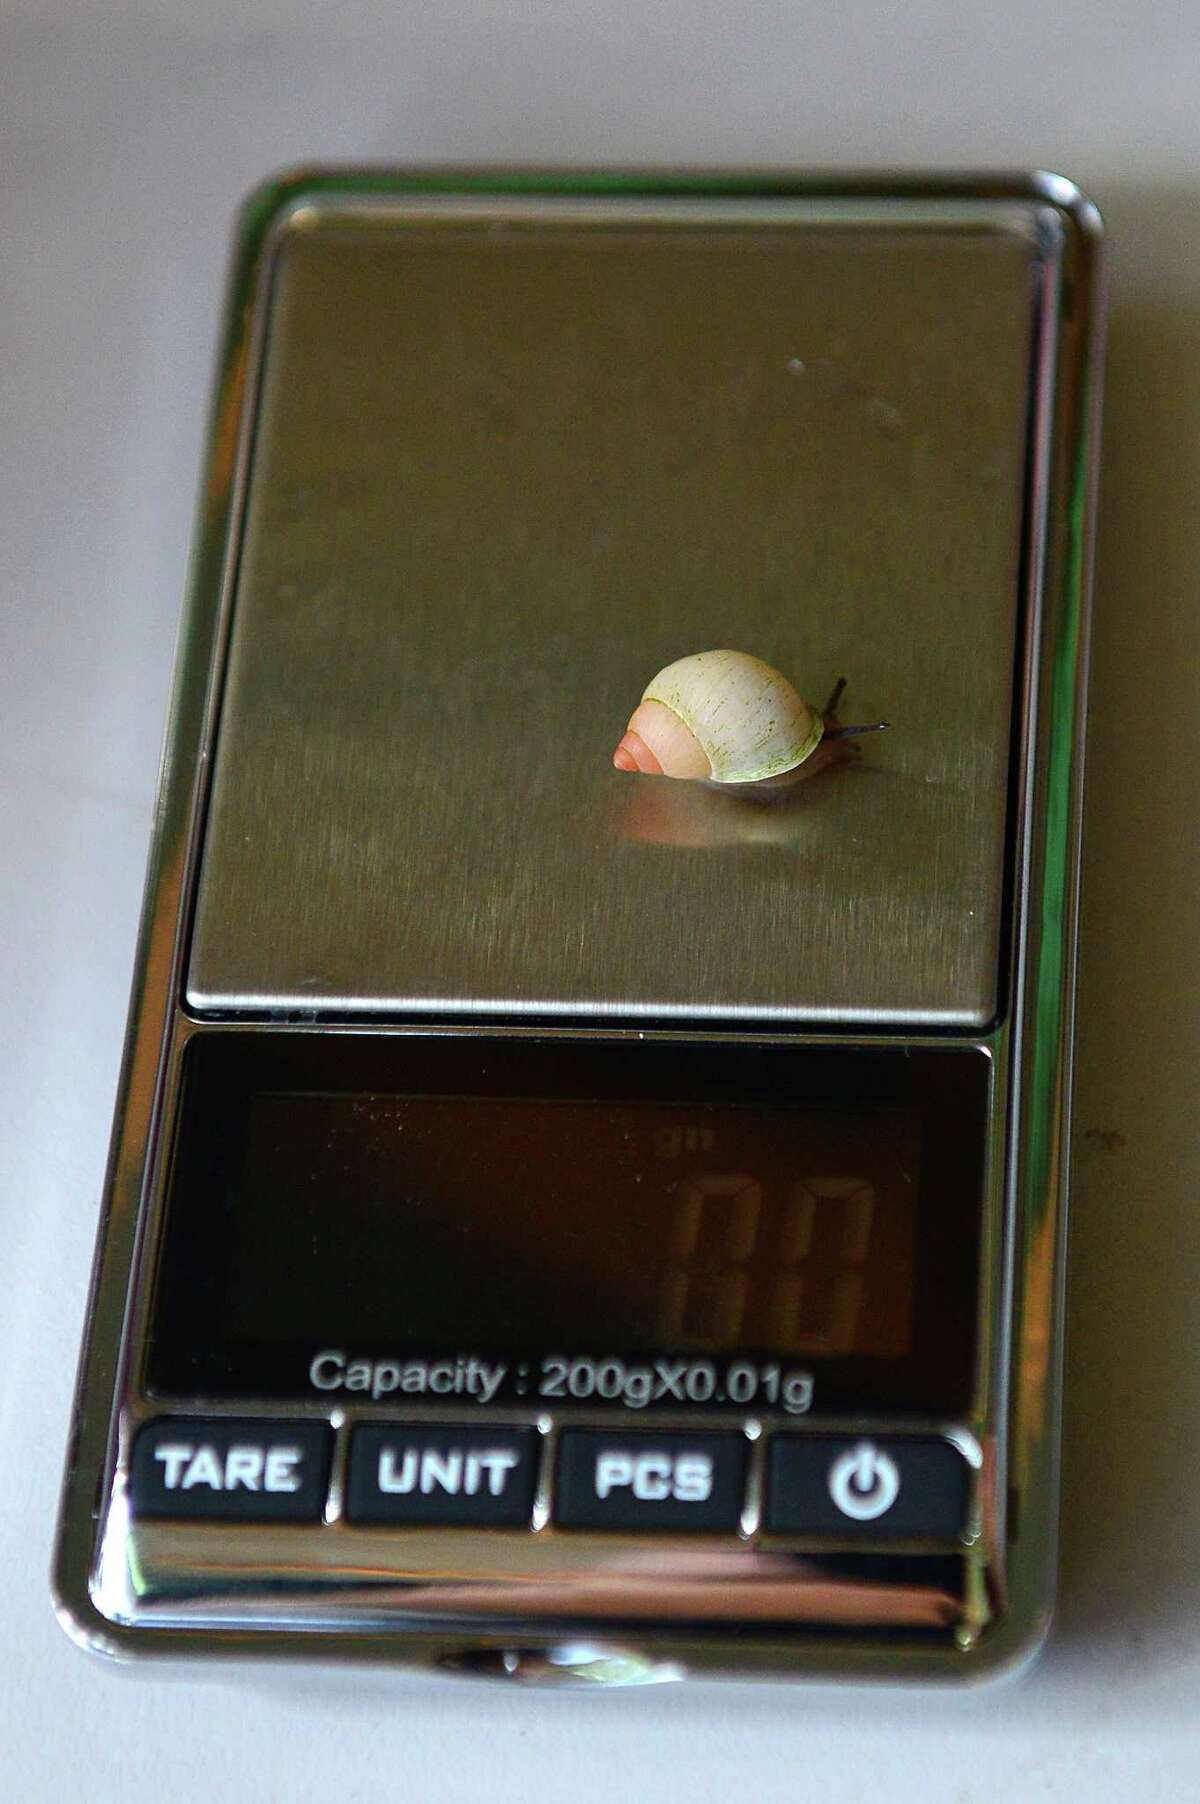 A rare partula snail, which is extinct in the wild and one of the world's smallest snails, is pictured during the annual weigh-in to record animals vital statistics at ZSL London Zoo in London on August 21, 2014.